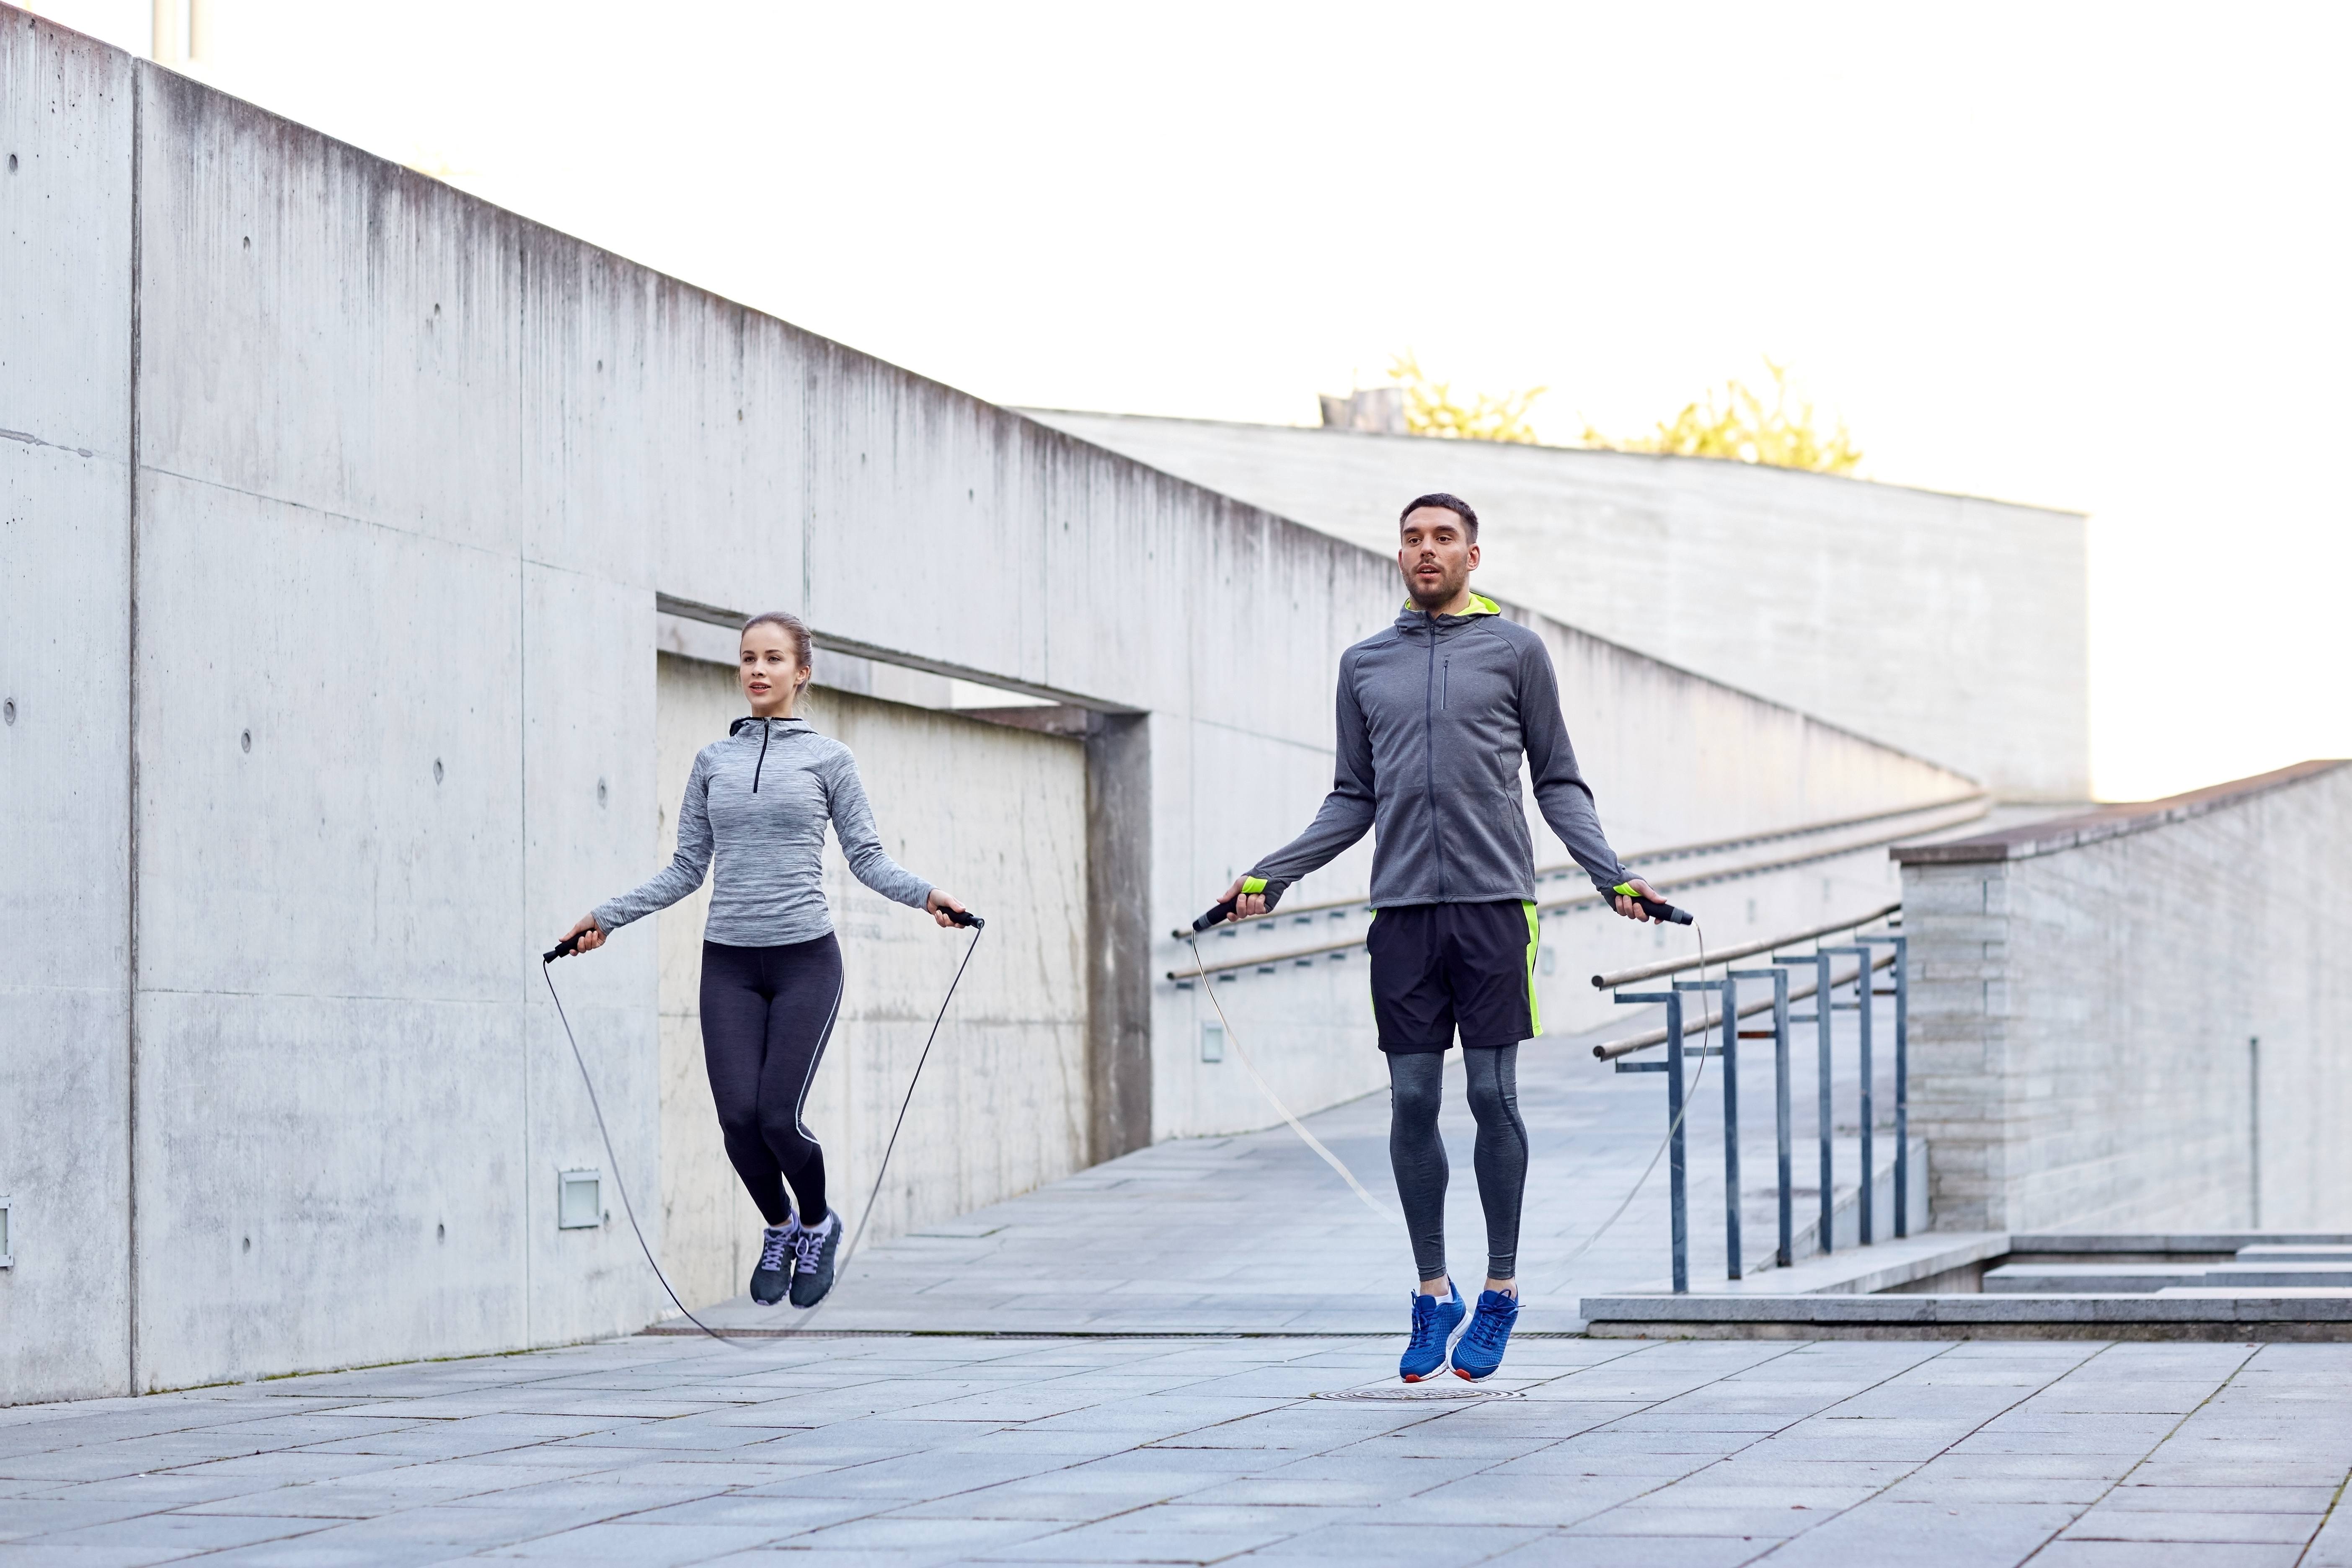 fitness, sport, people, exercising and lifestyle concept - man and woman skipping with jump rope outdoors